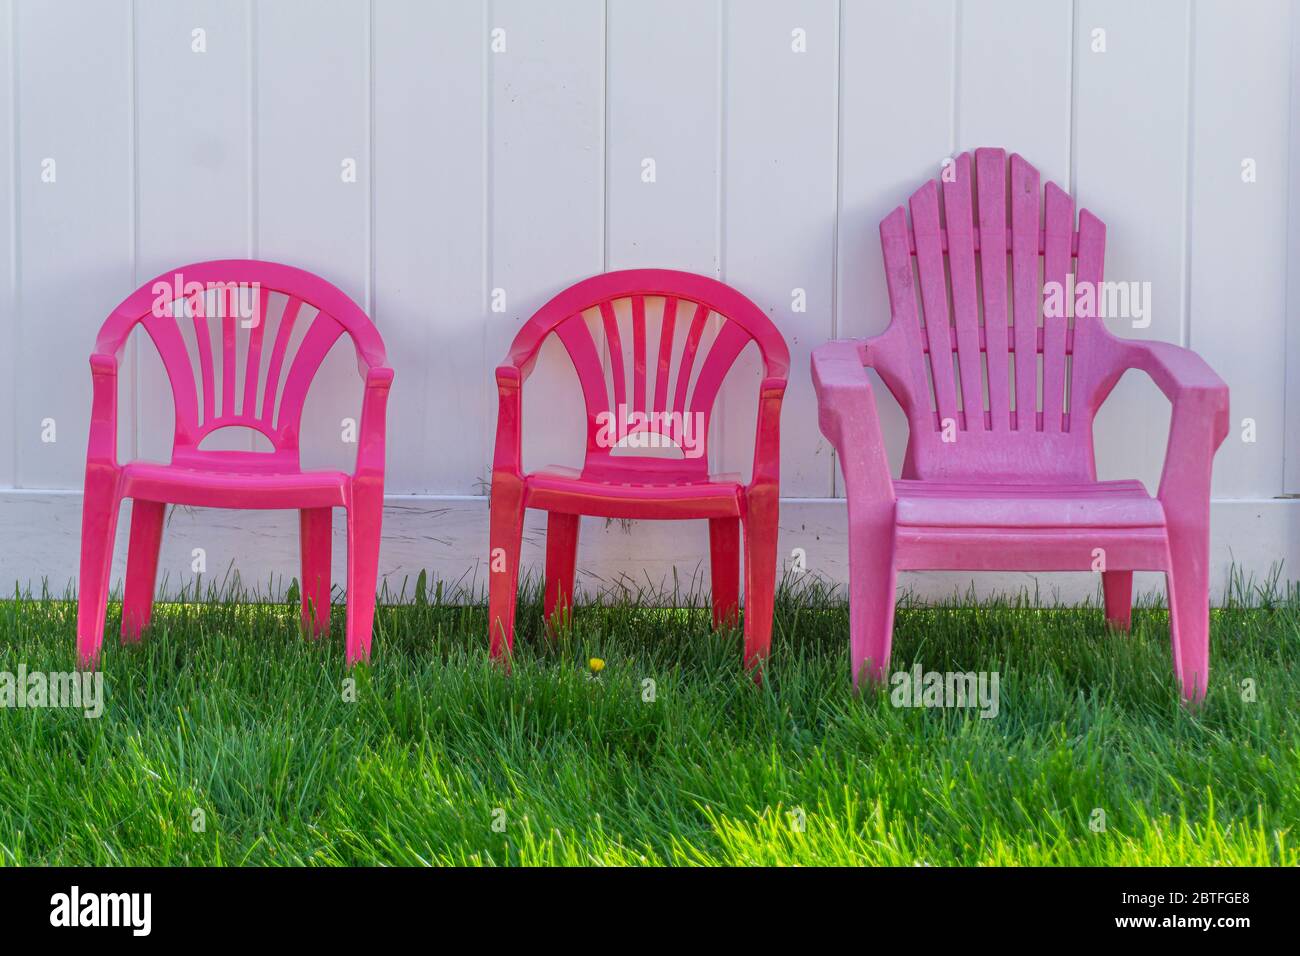 Three Miniature Children S Colourful Plastic Chairs On The Lawn Against A White Wooden Fence Stock Photo Alamy